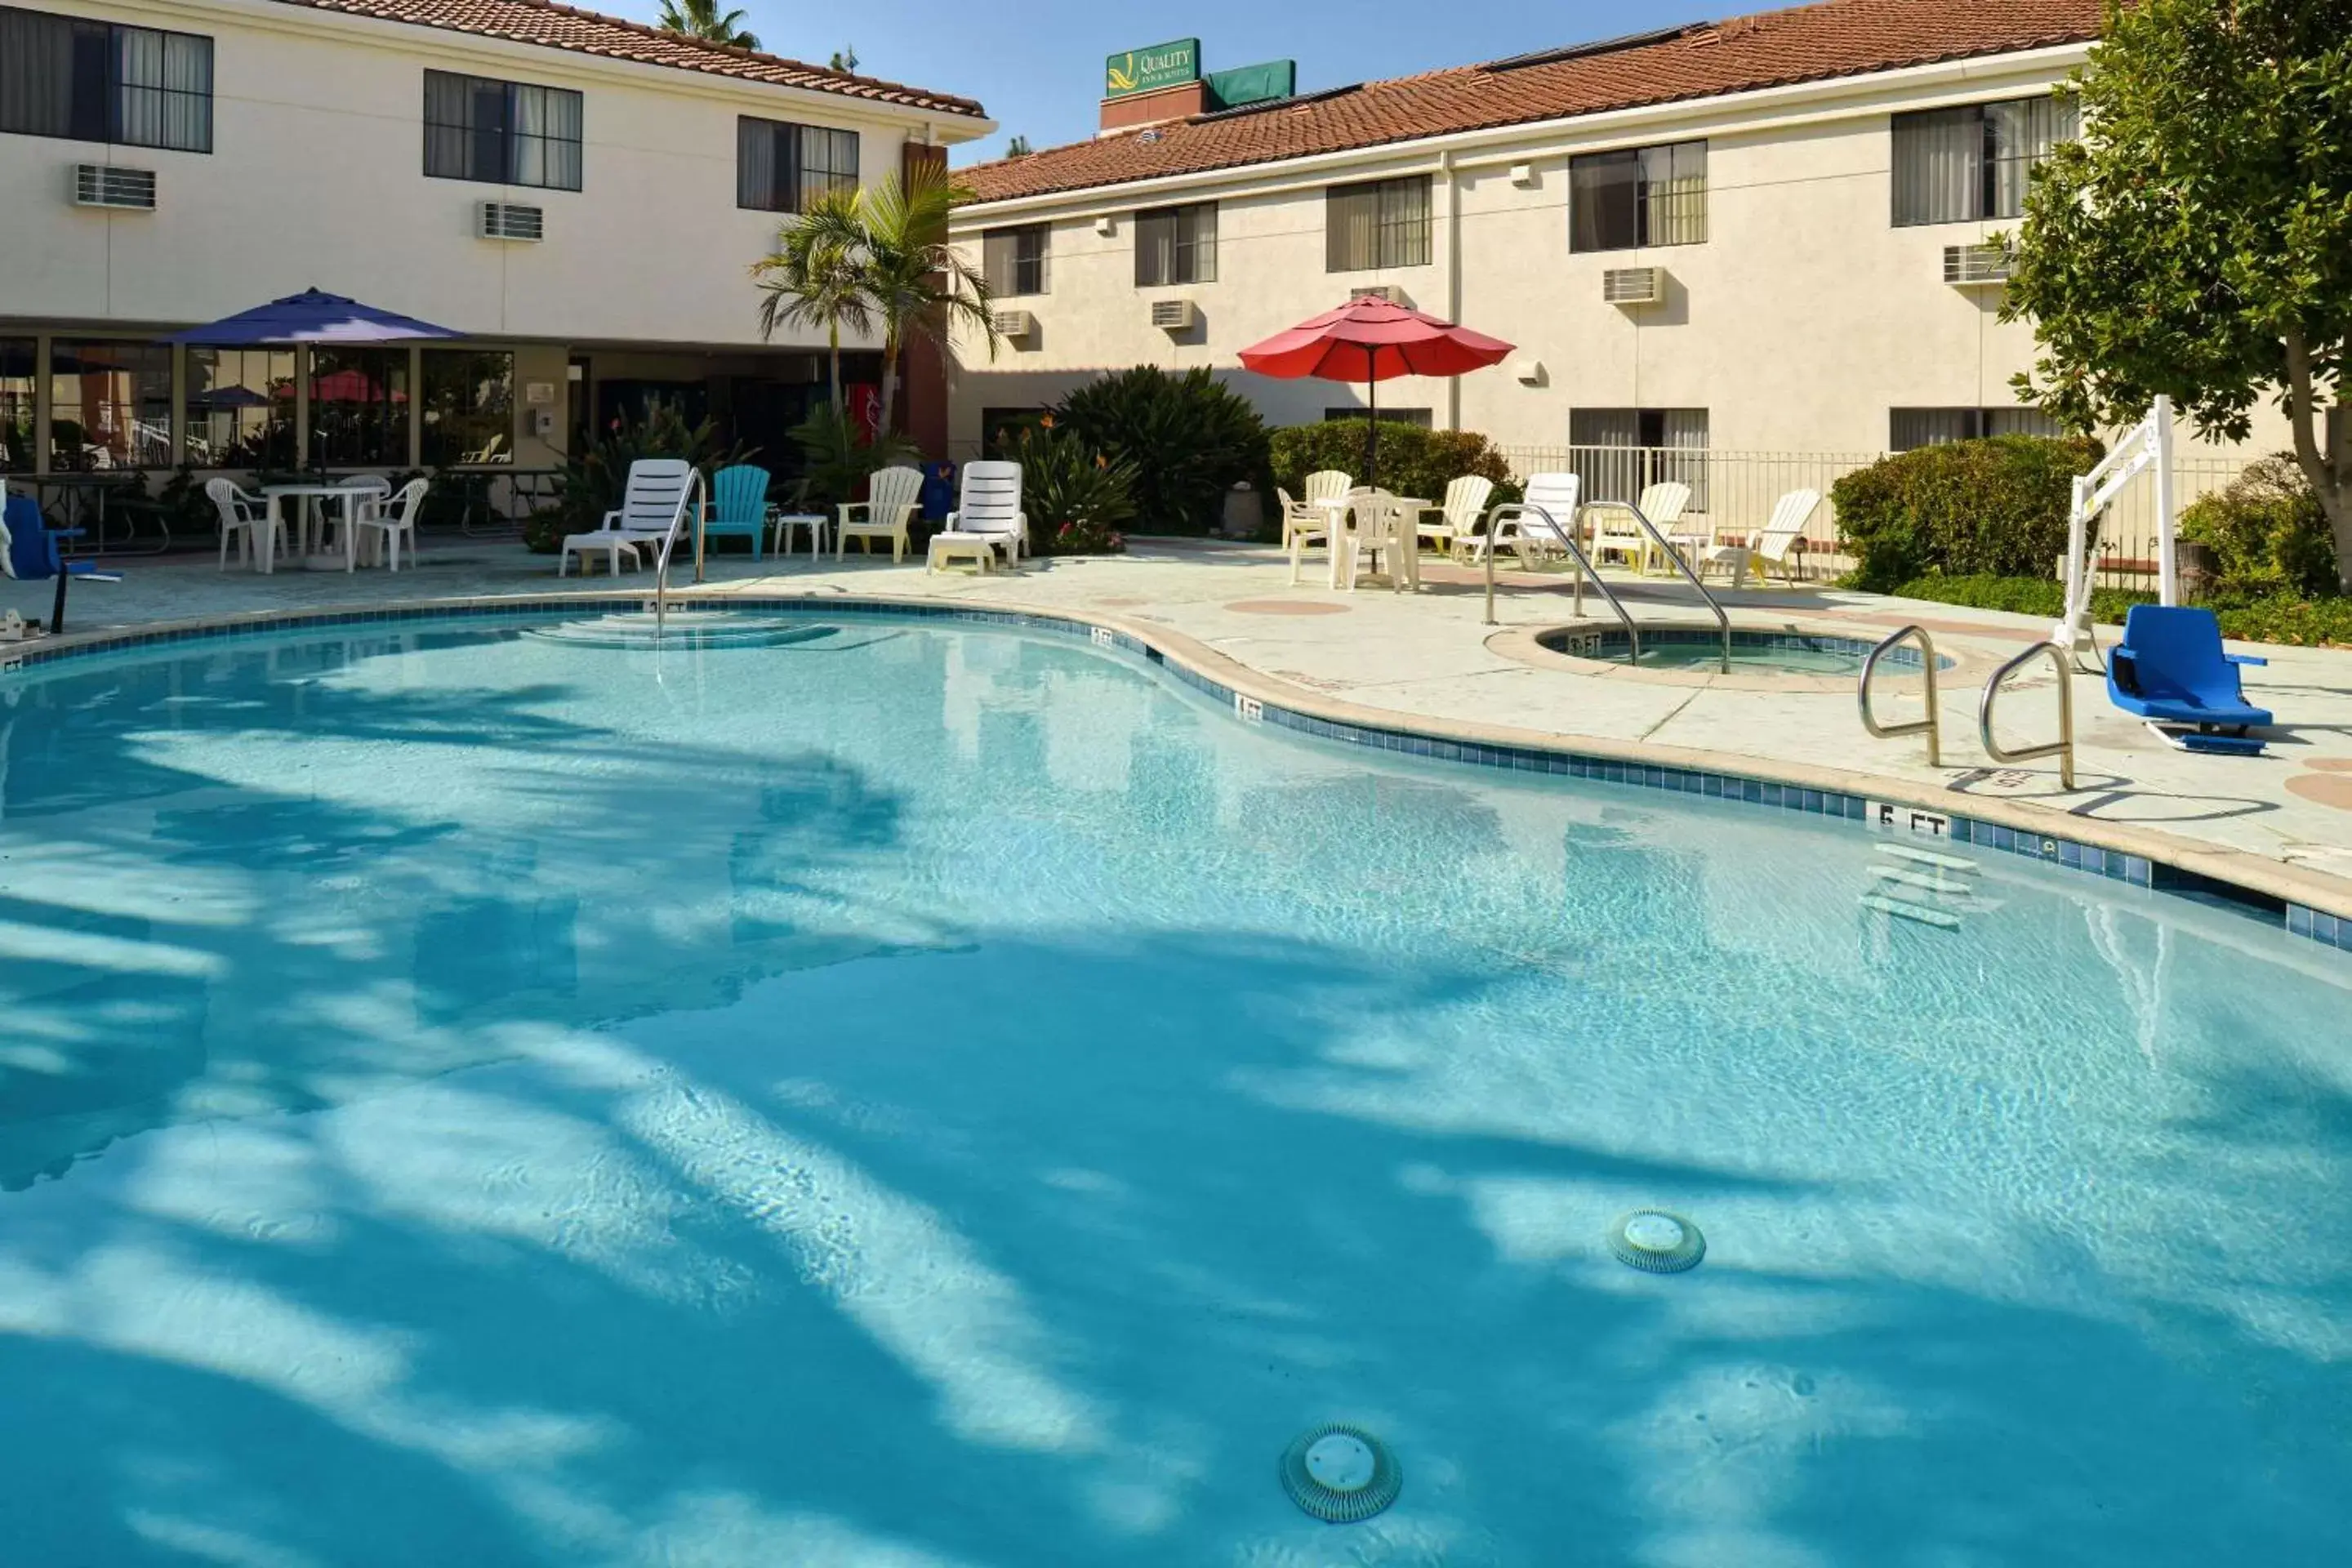 On site, Swimming Pool in Quality Inn & Suites Walnut - City of Industry